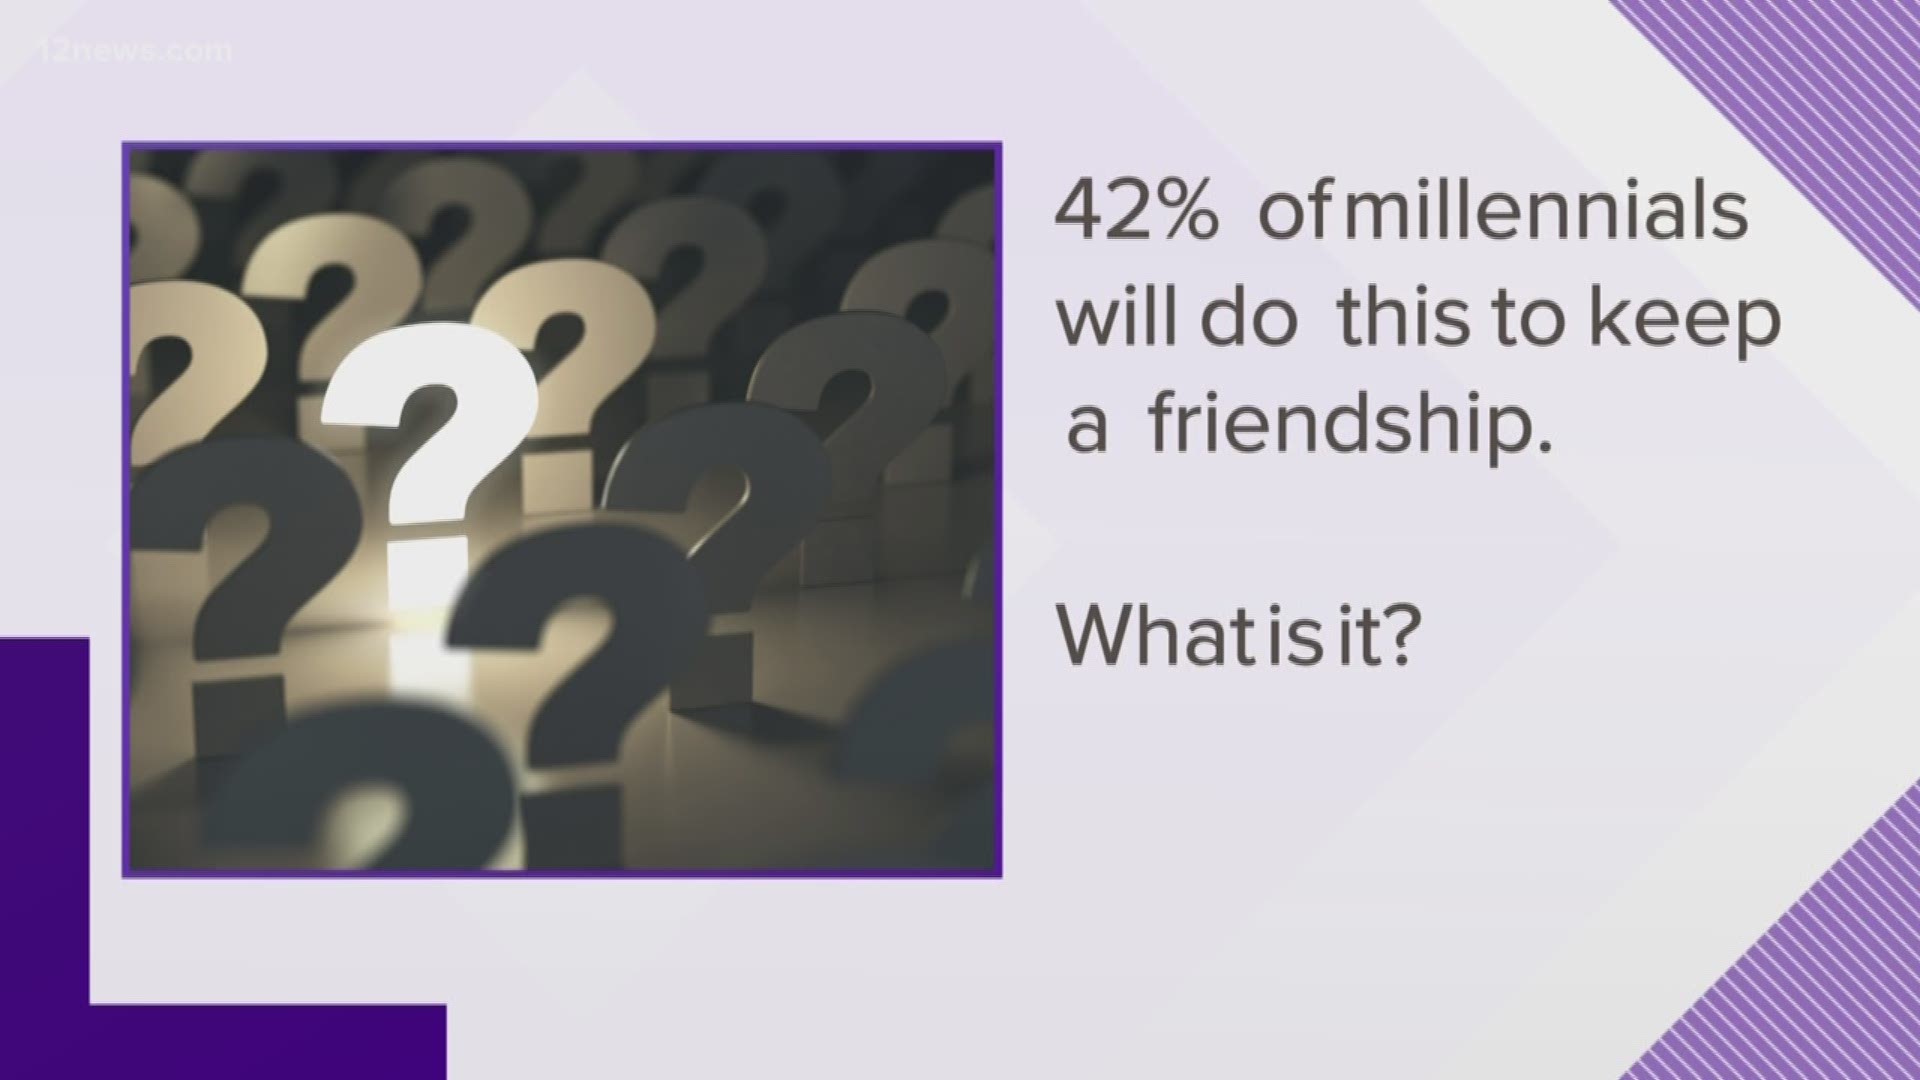 42% of millennials will do THIS just to keep a friendship. What is it?